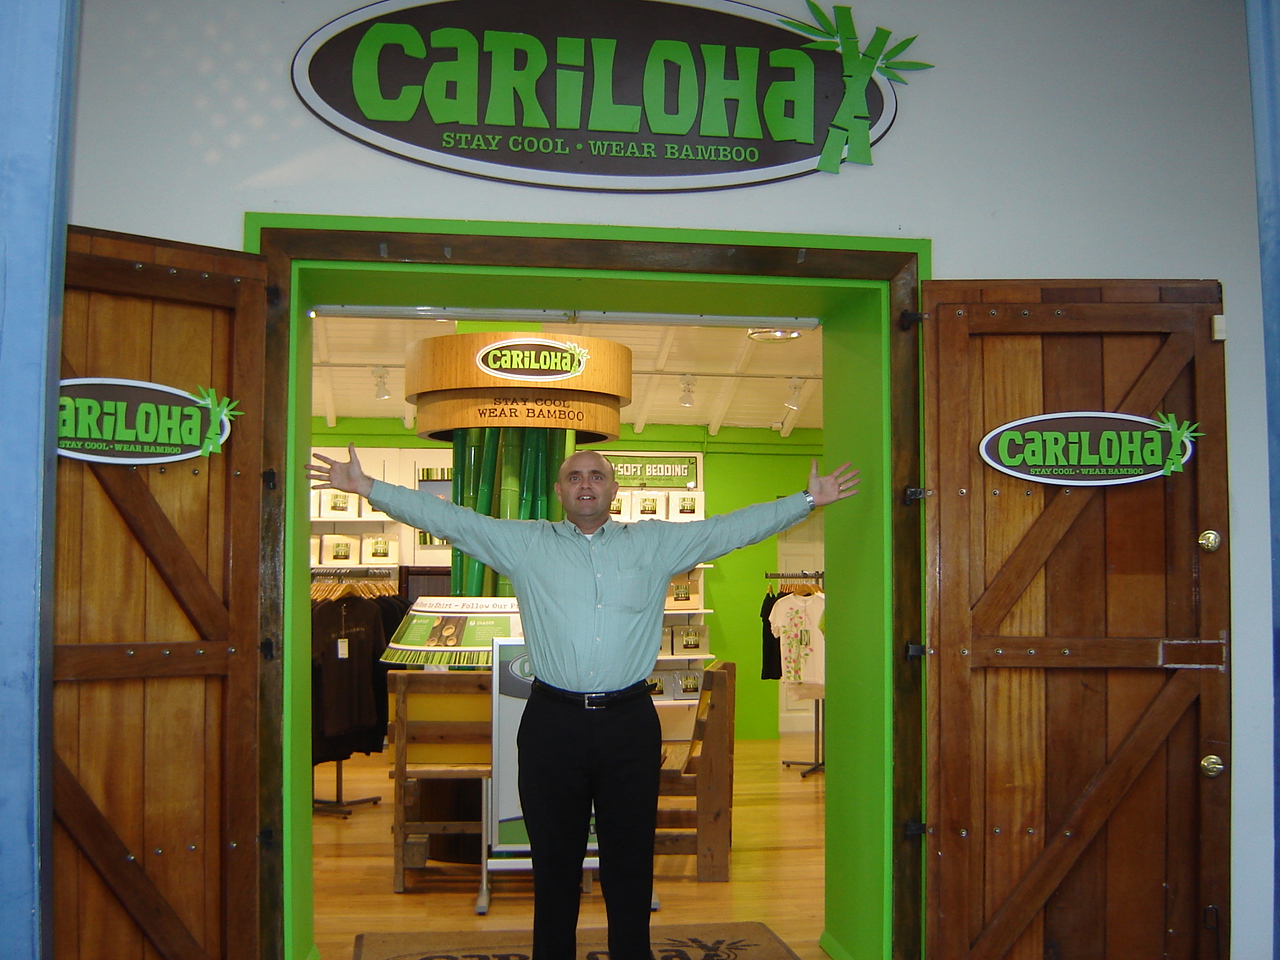 Cariloha St. Maarten Retail Store of Bamboo Products